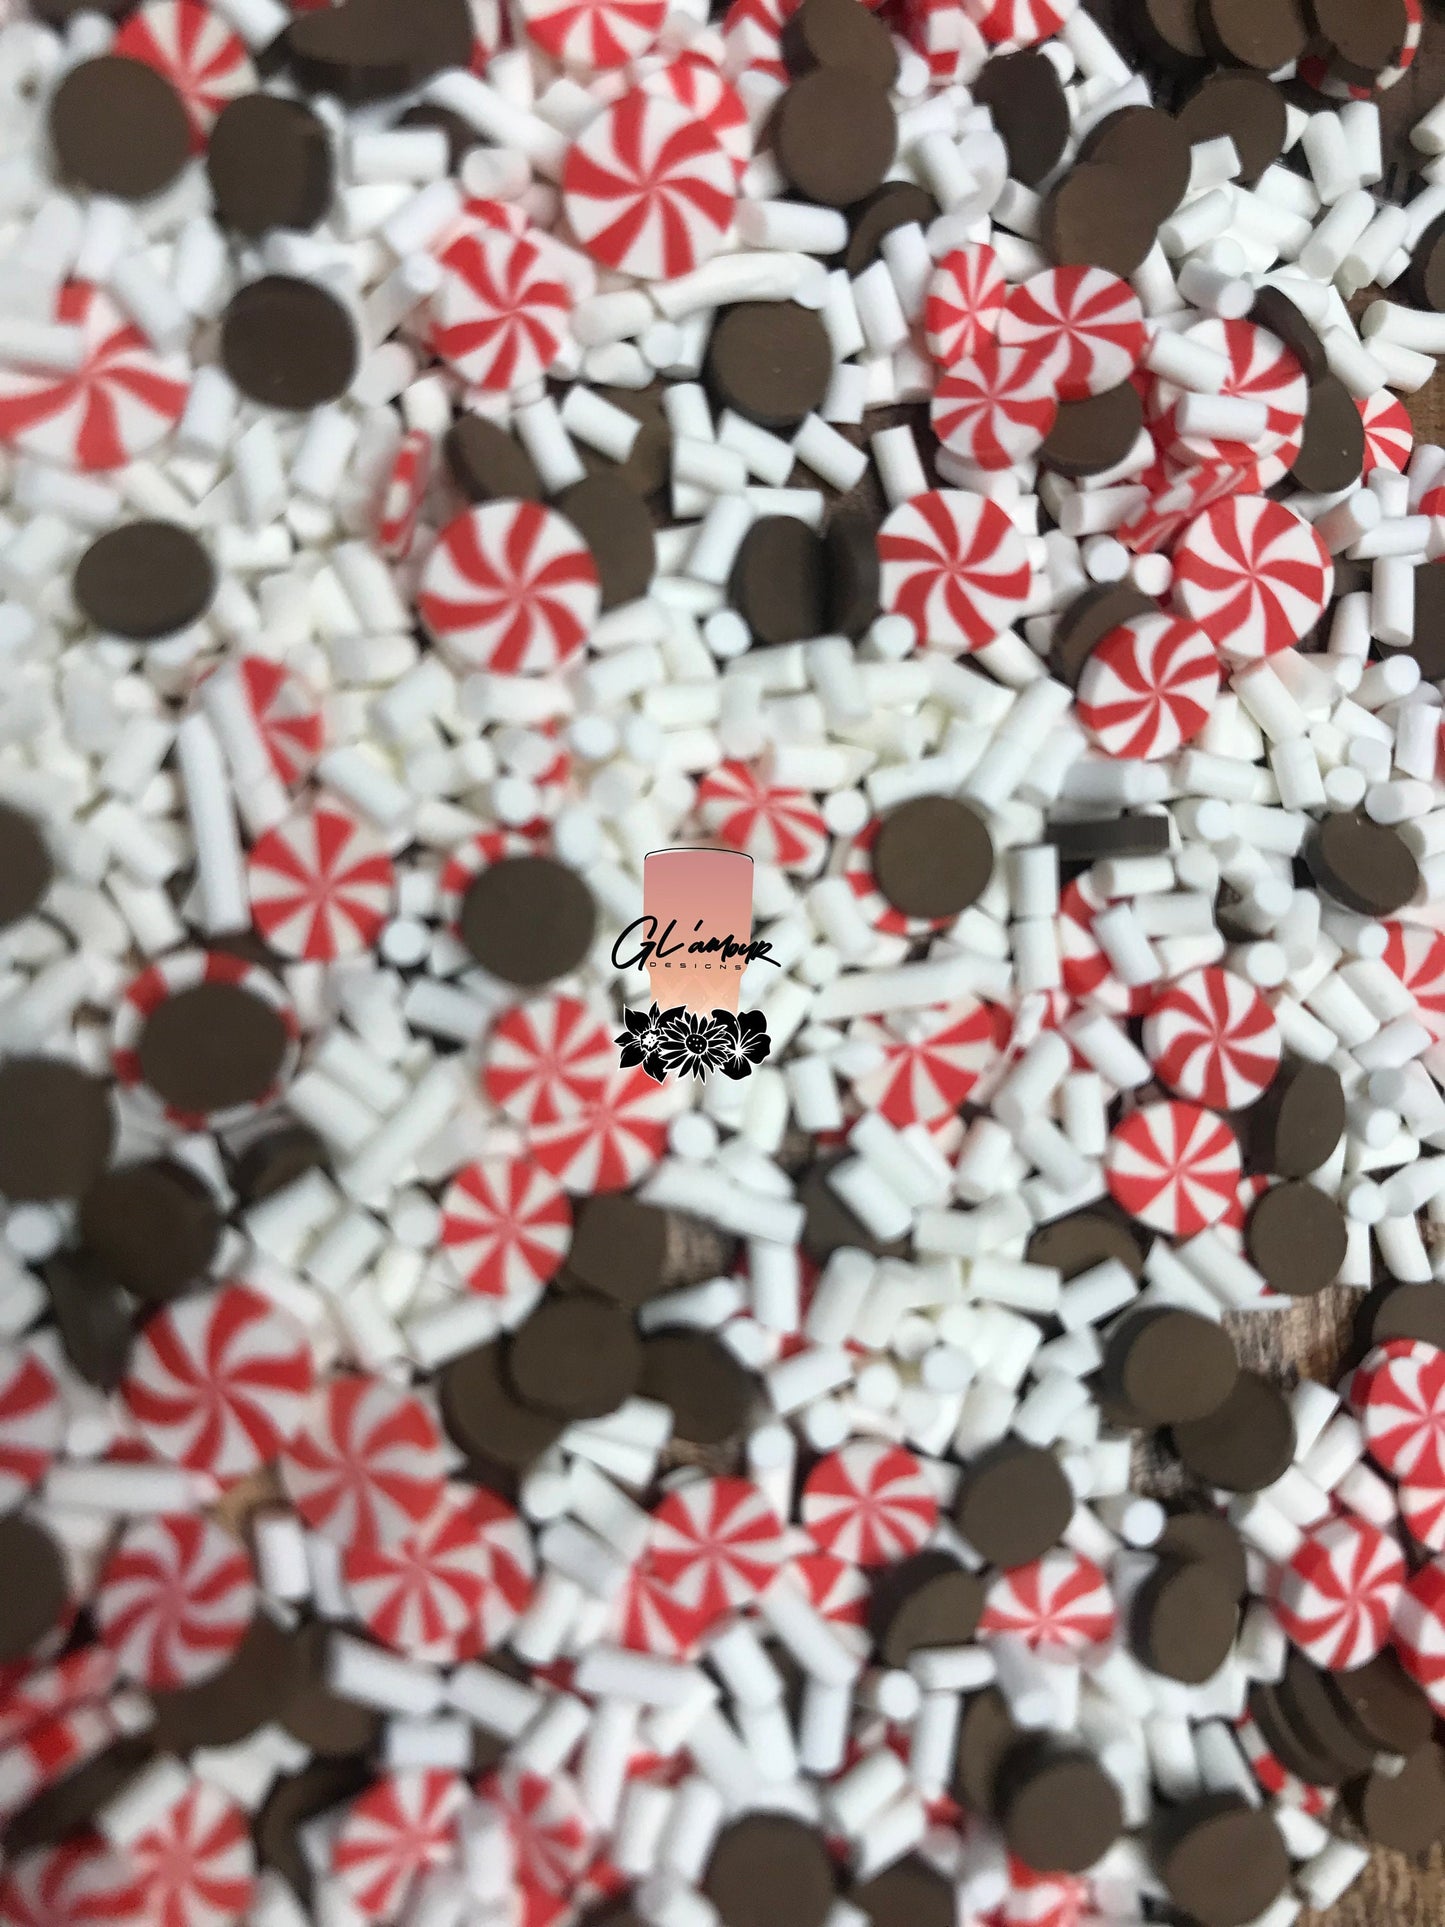 5mm Xmas Mix with Chocolate Polymer Slices - small